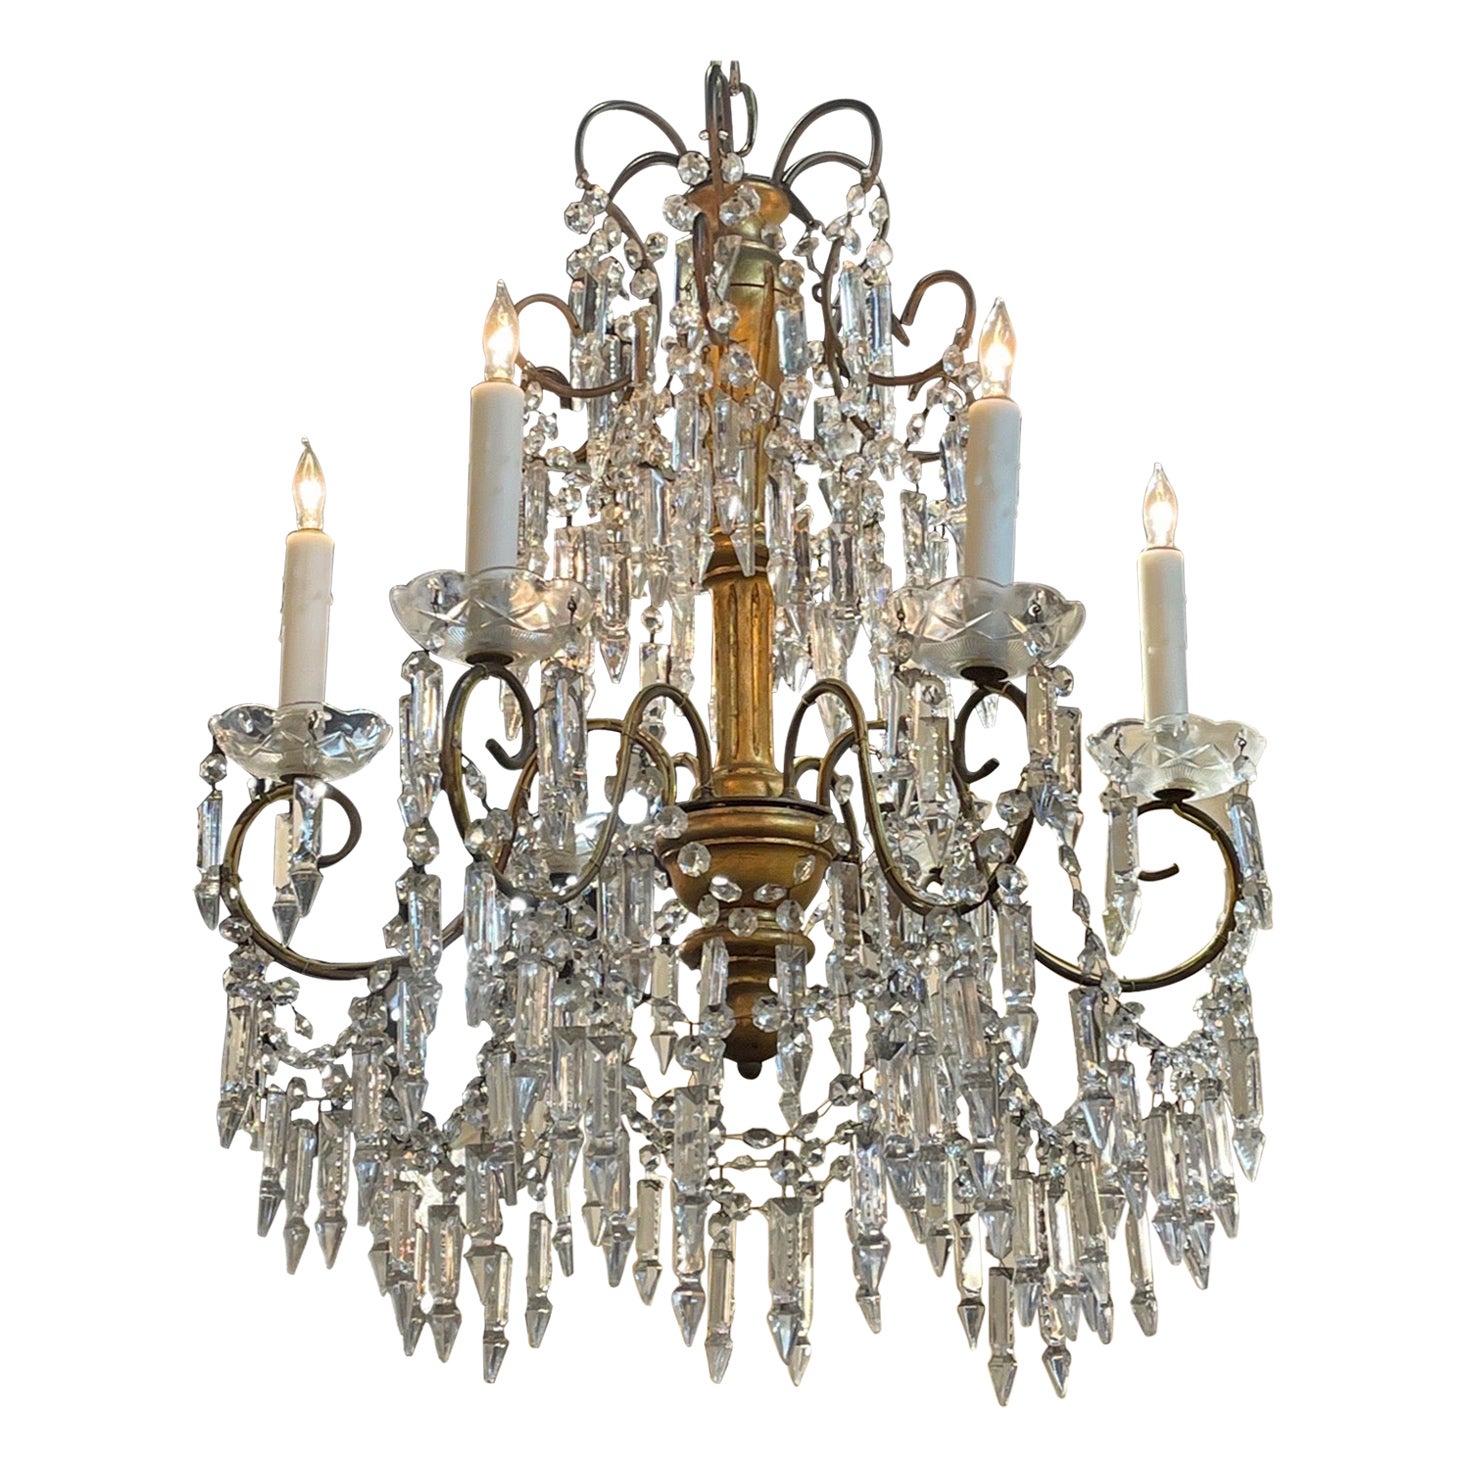 Antique Italian Crystal and Giltwood Chandelier